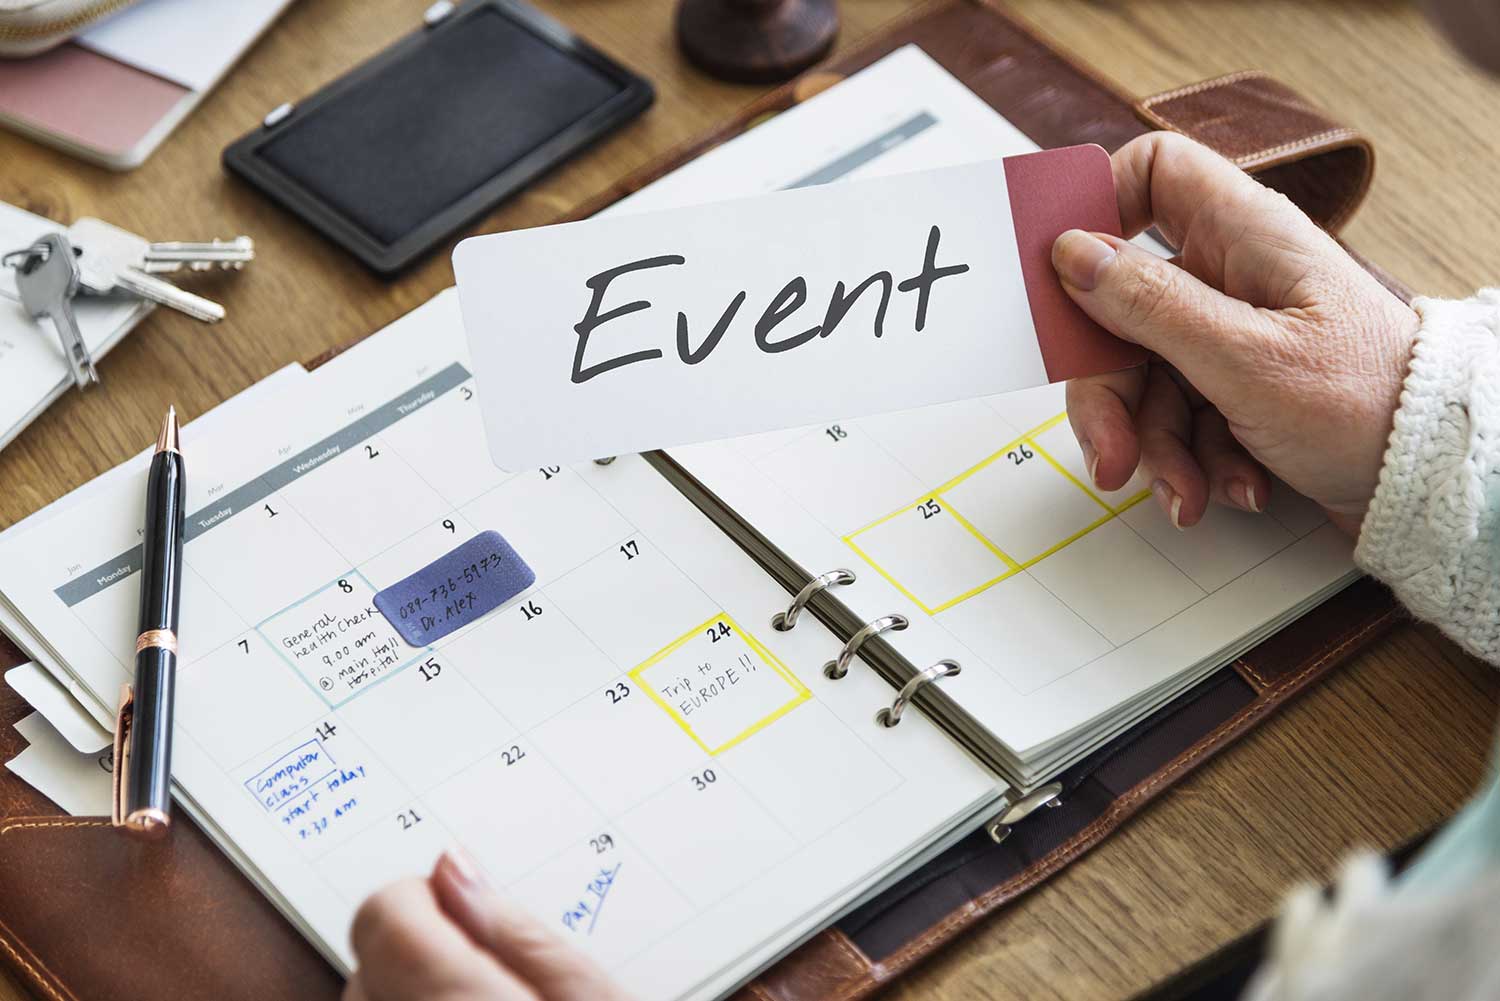 How to Organize a Successful Event?